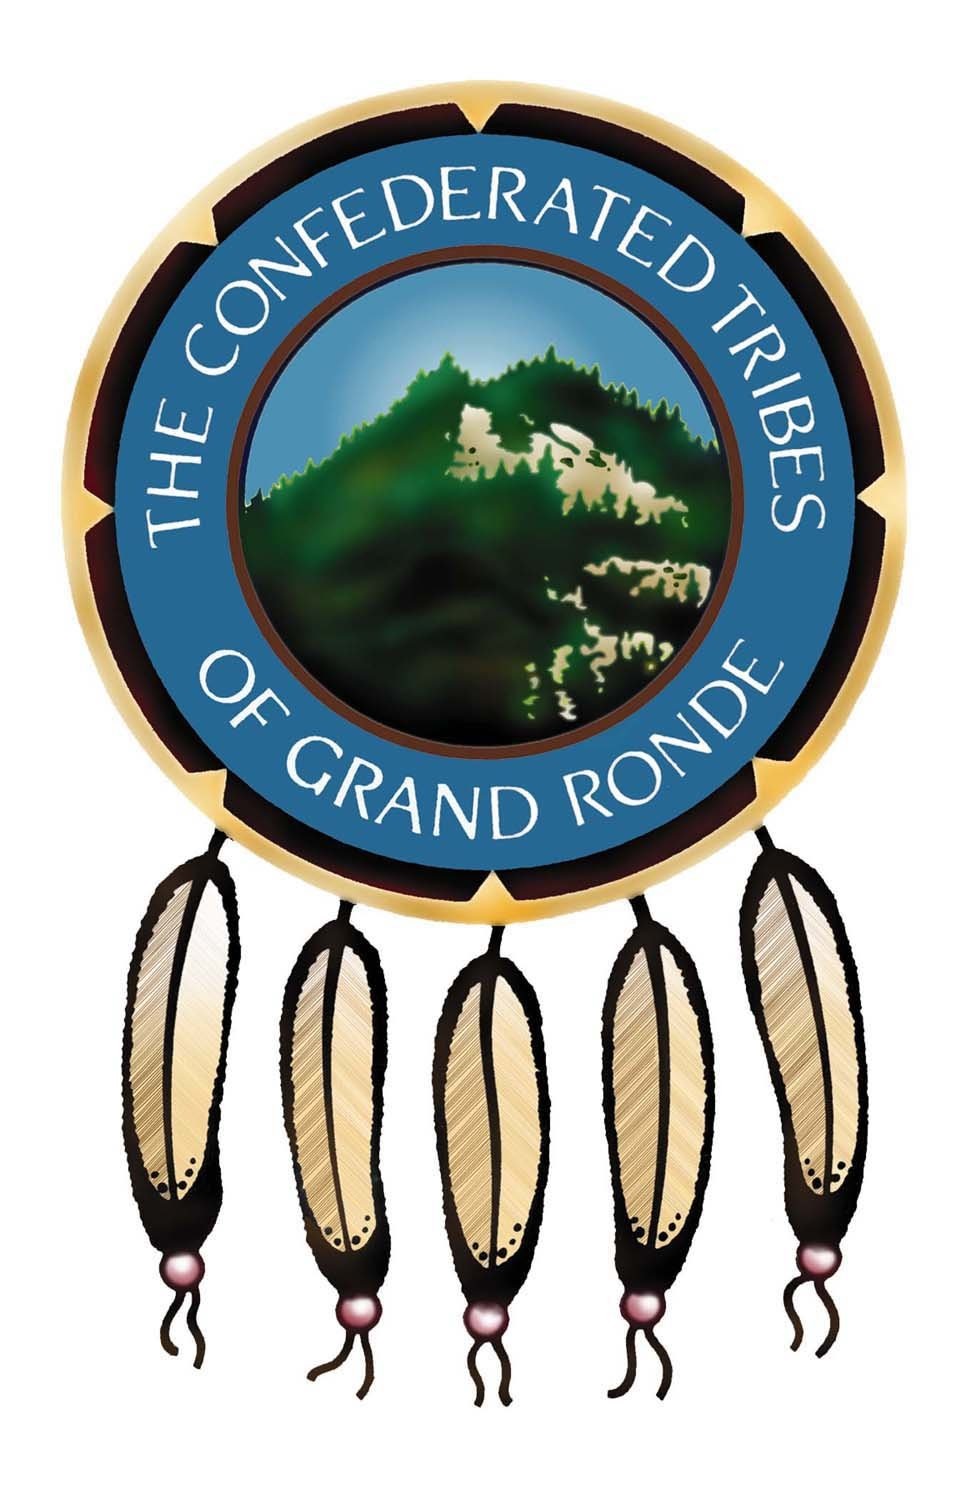 The Confederated Tribes of Grand Ronde